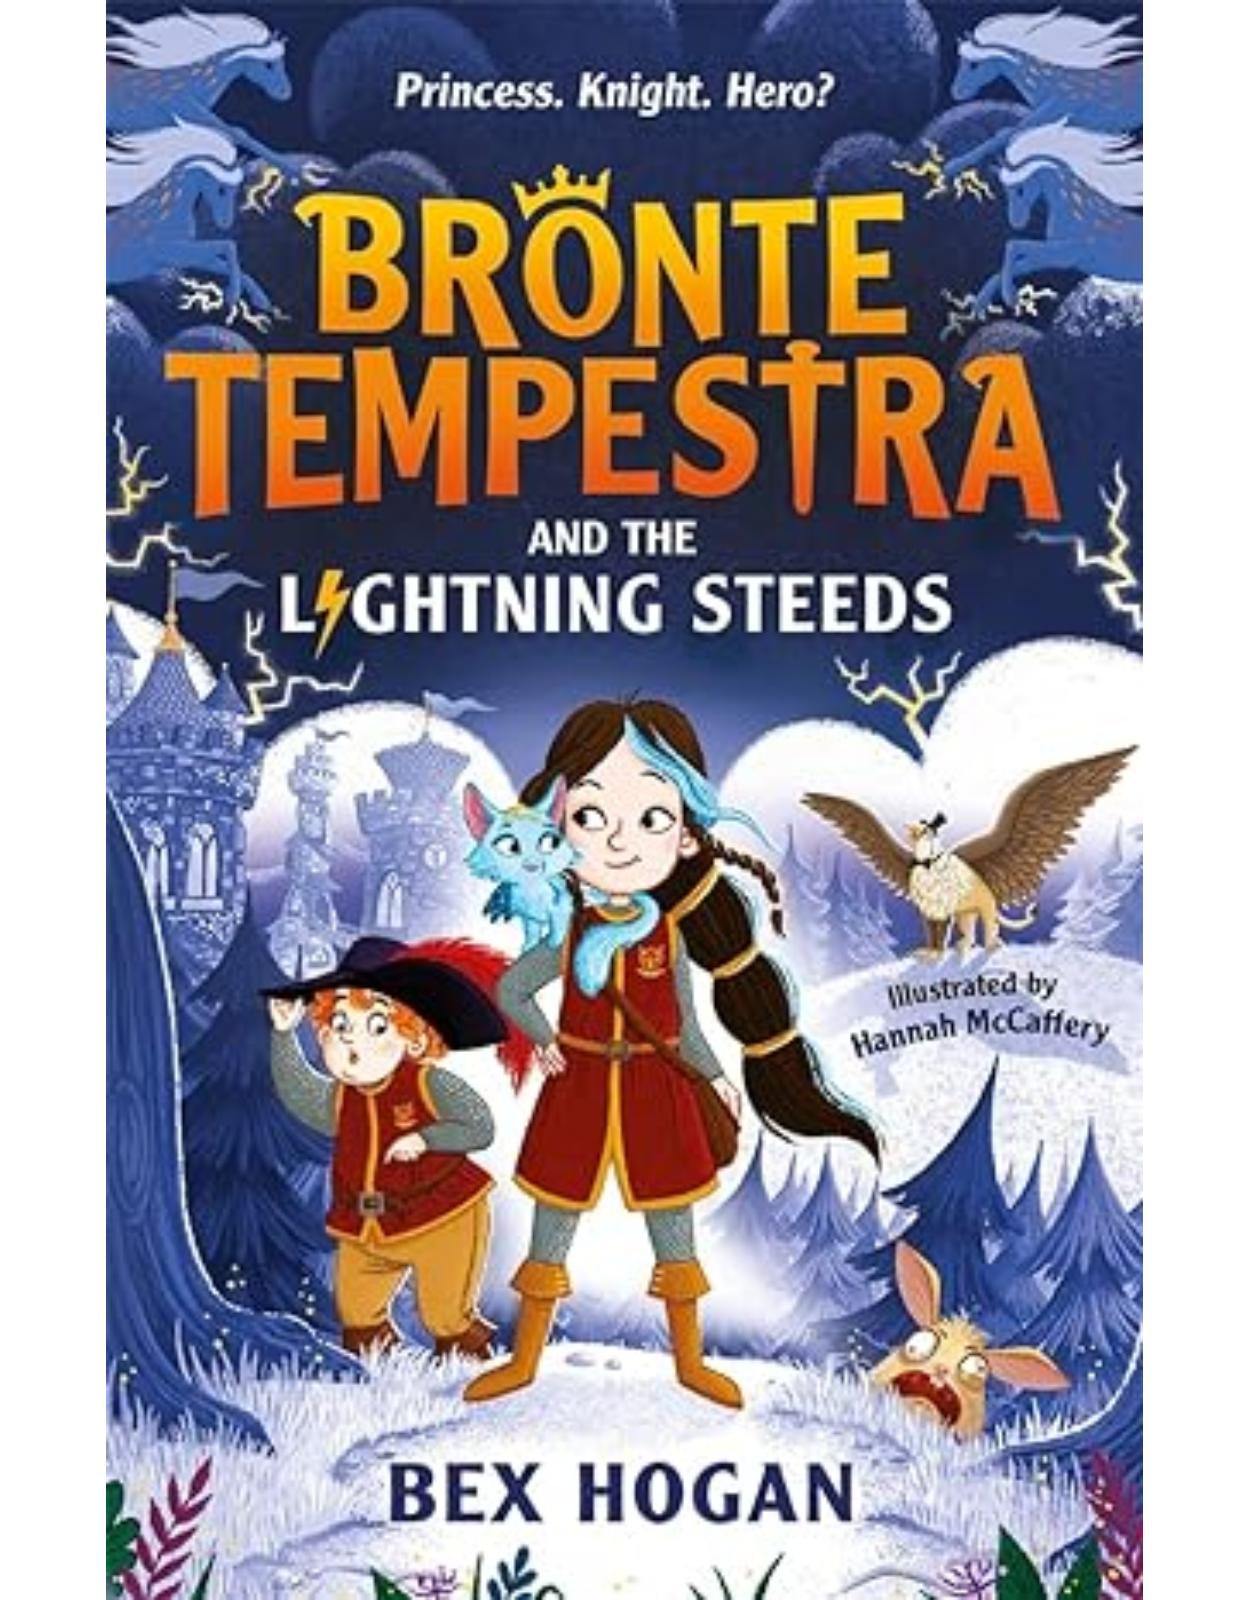 Bronte Tempestra and the Lightning Steeds